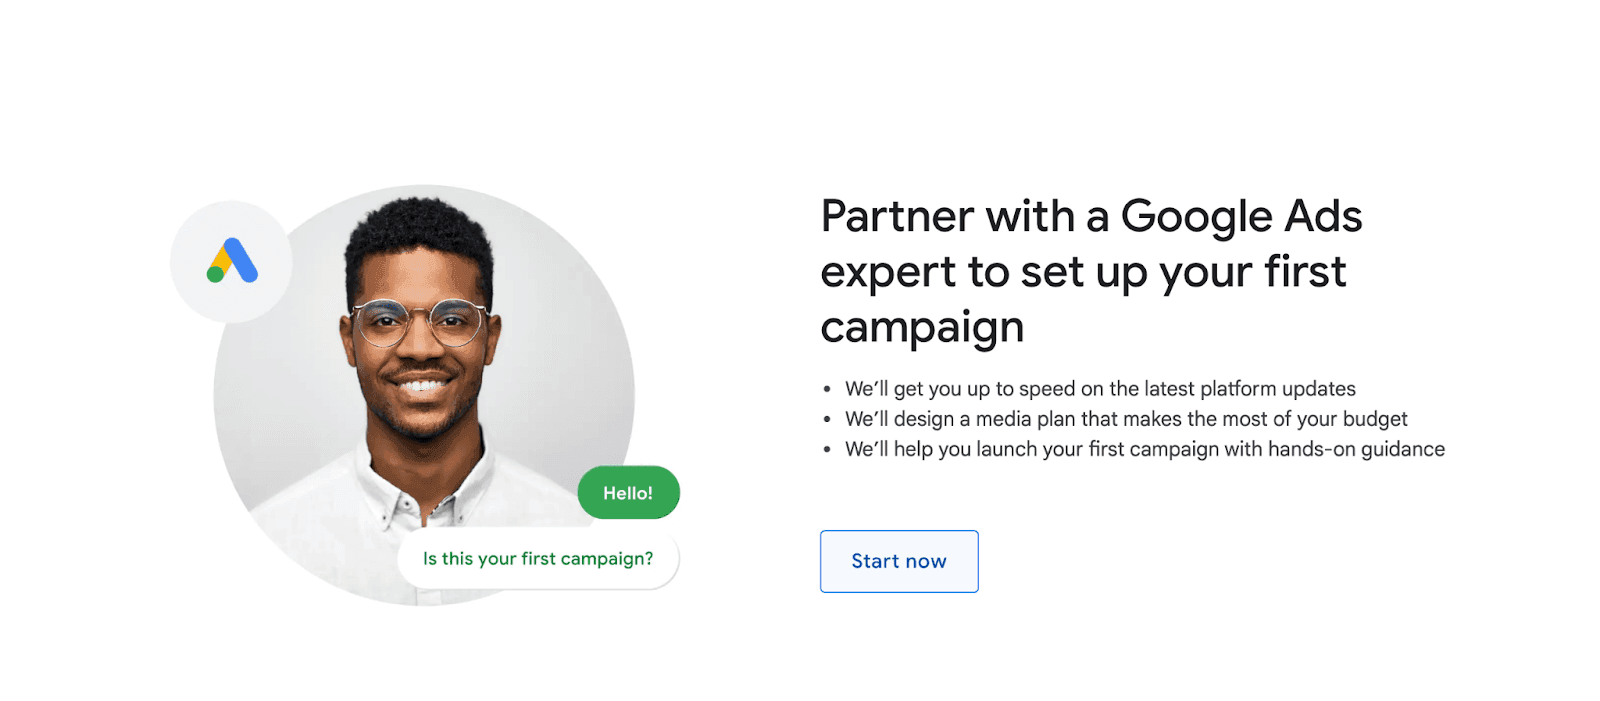 Partner with a Google Ads expert to set up your first campaign